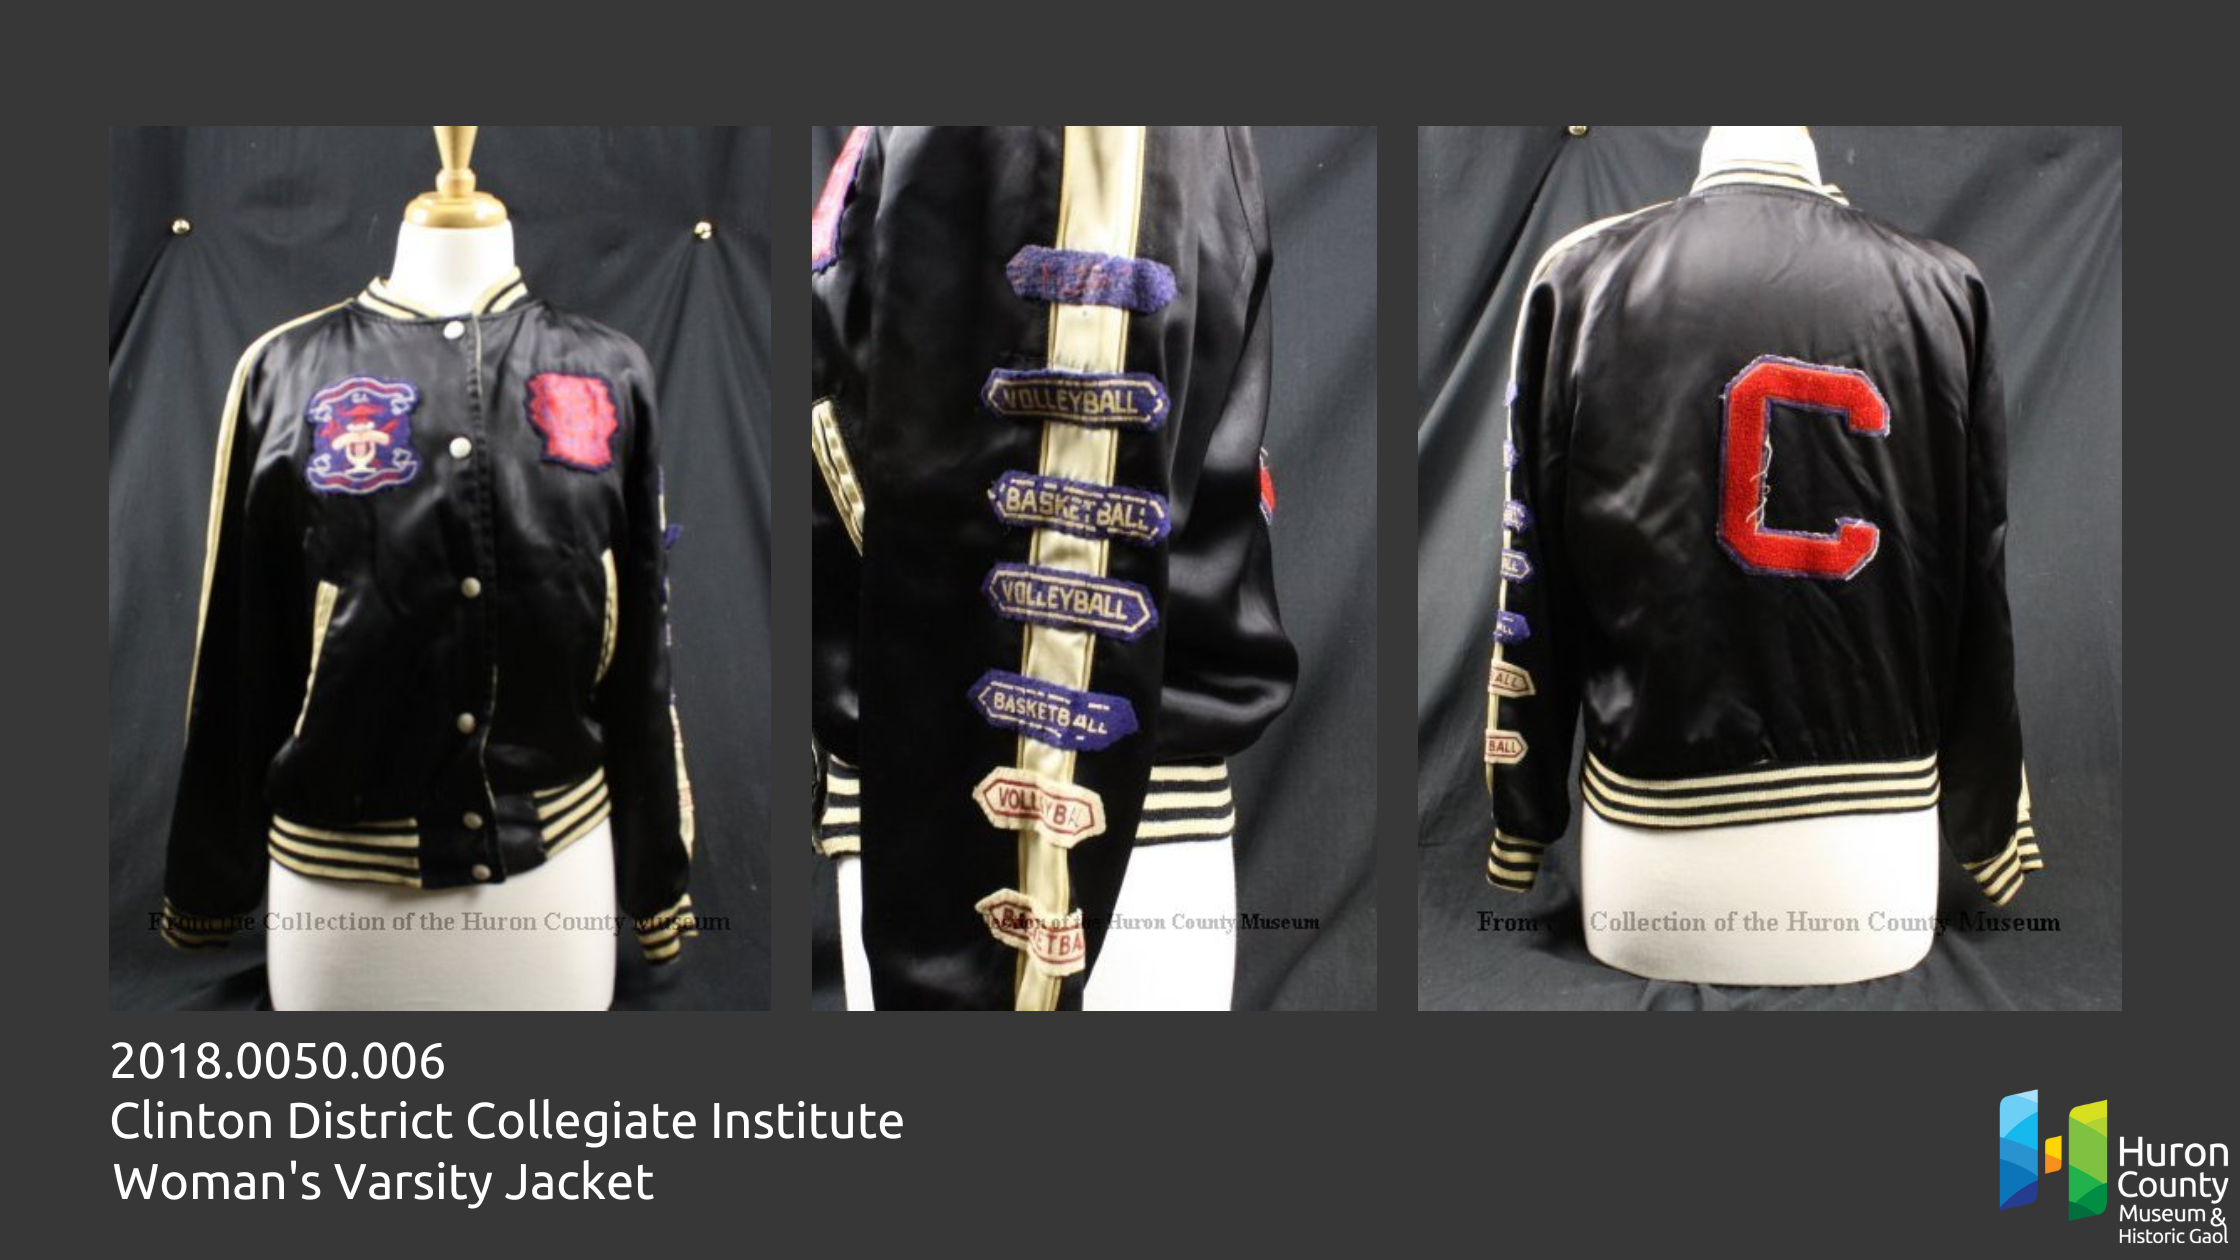 Three images showing different views of a Clinton District Collegiate women's varsity jacket from 1956